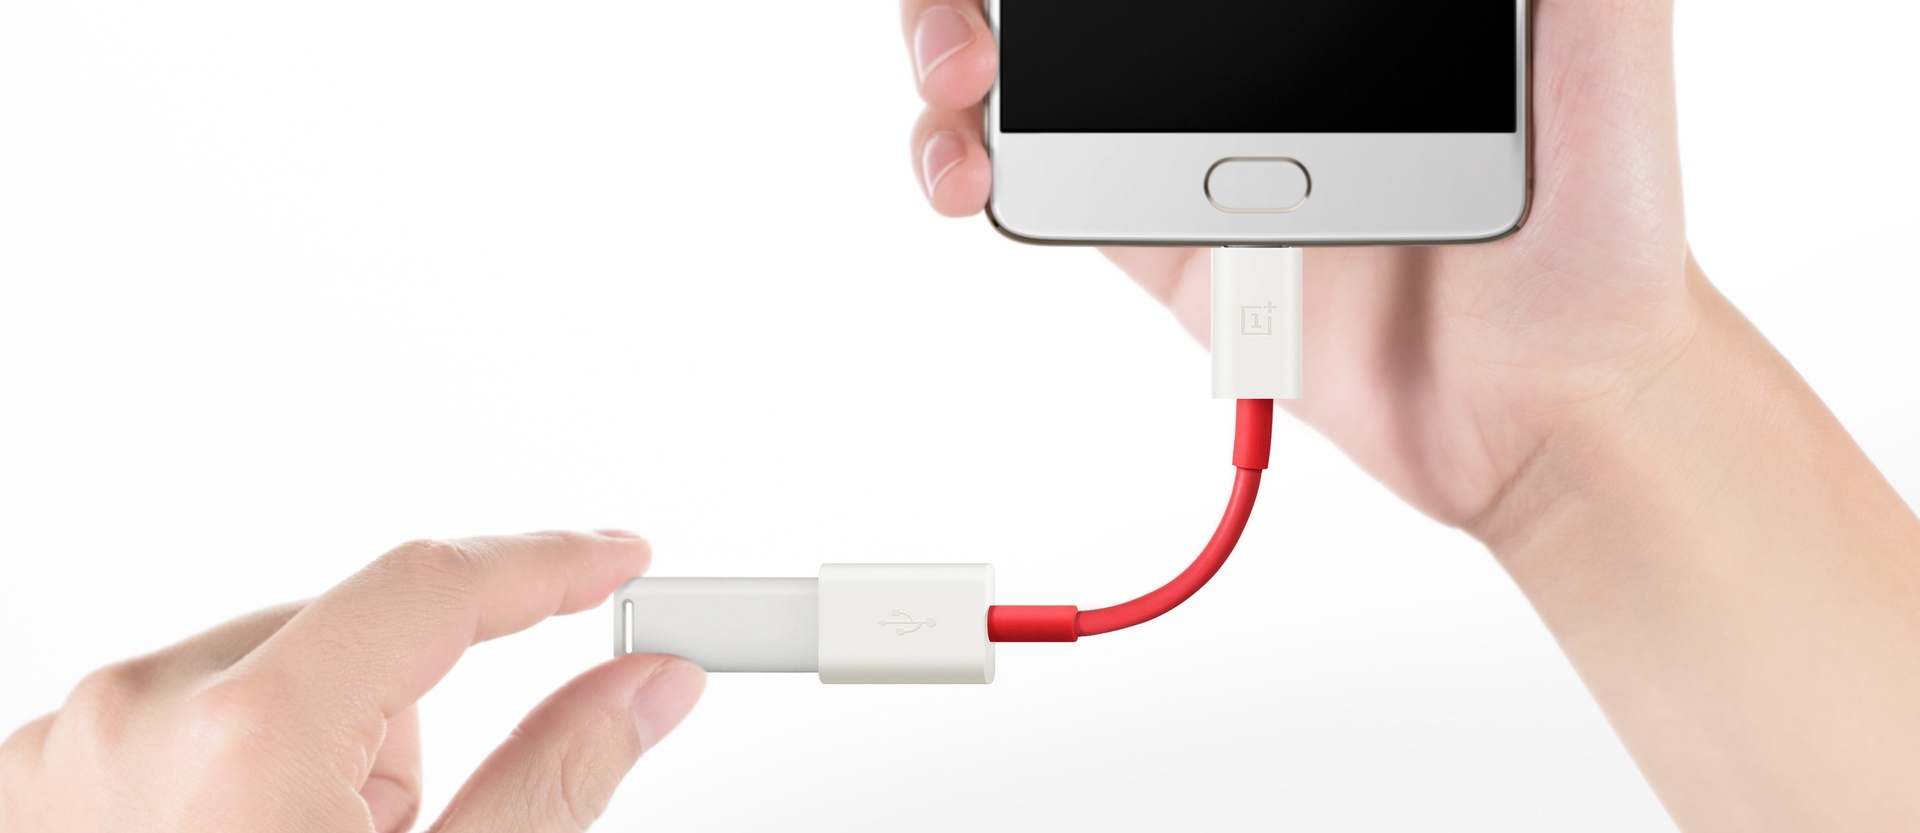 PRO OTG Power Cable Works for OnePlus F1s with Power Connect to Any Compatible USB Accessory with MicroUSB